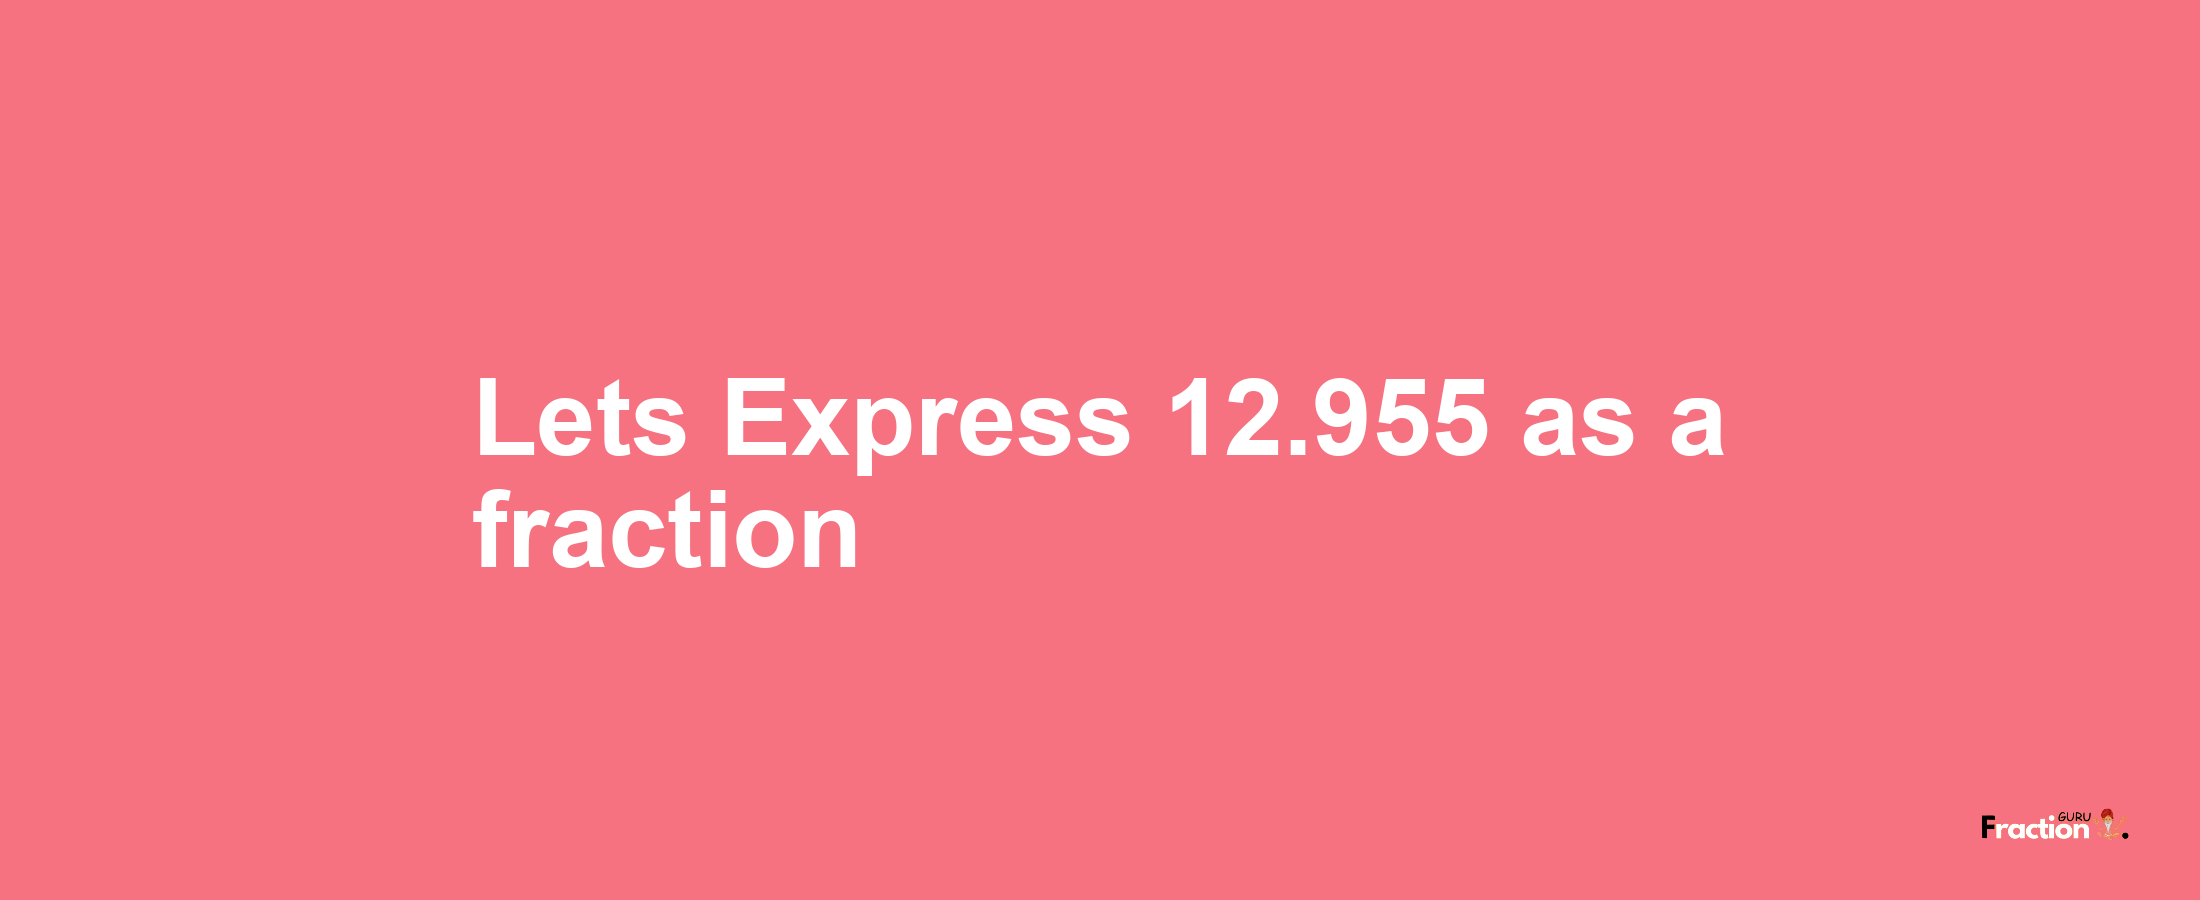 Lets Express 12.955 as afraction